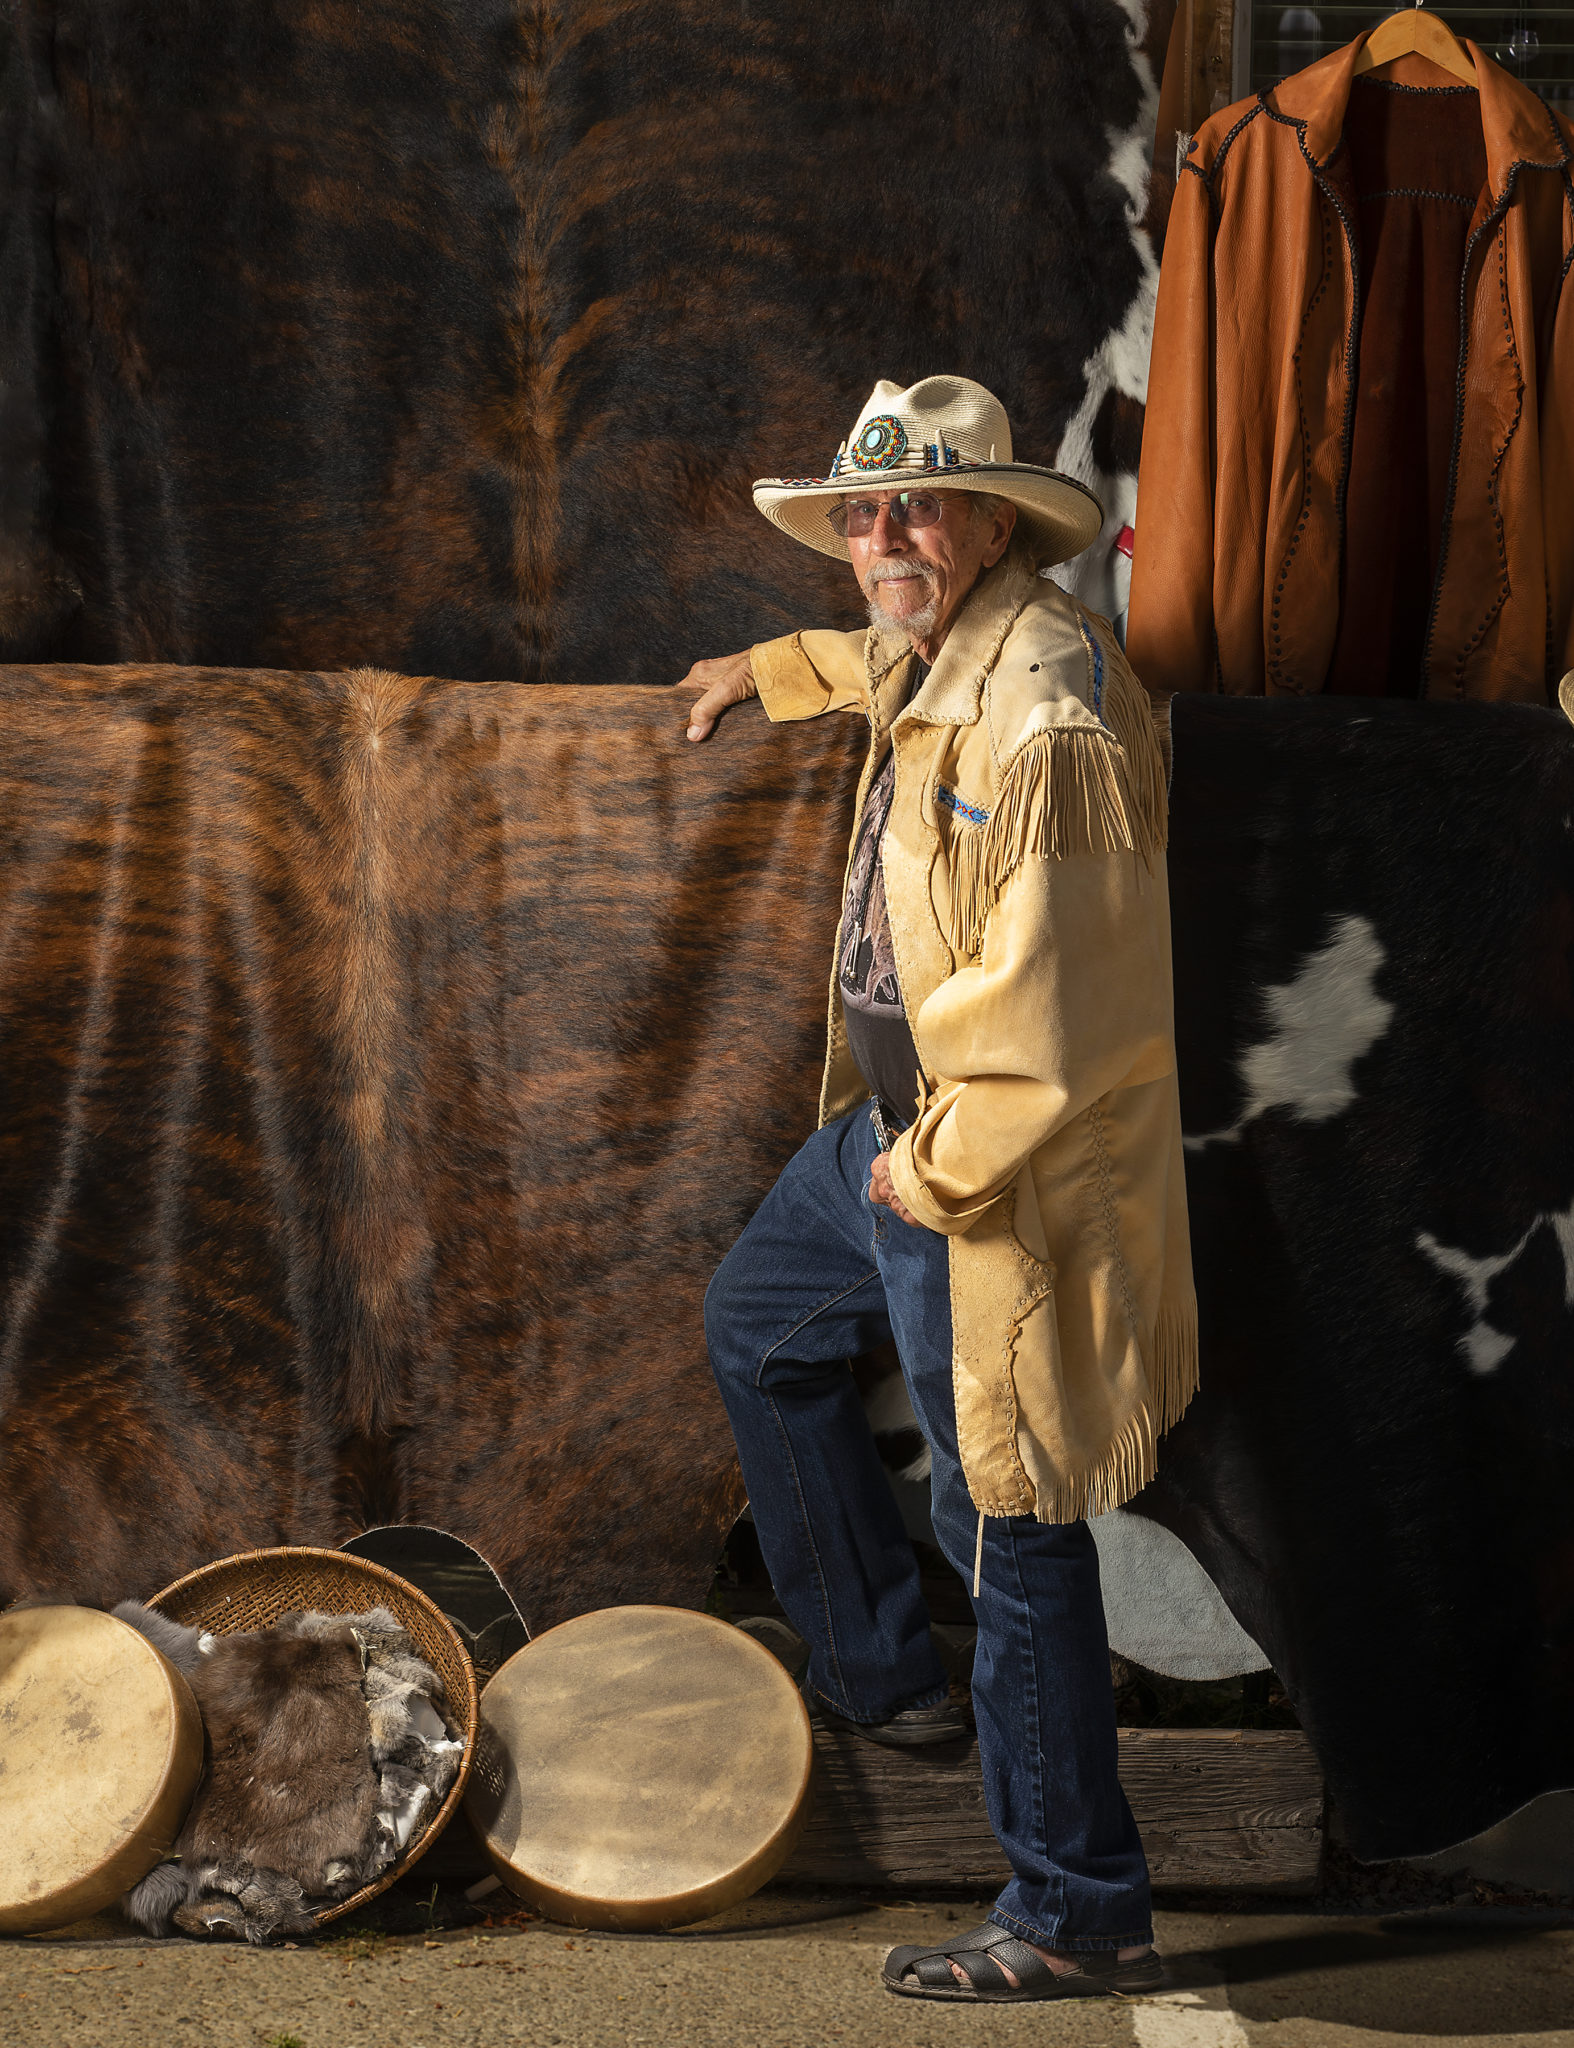 Leather artist and Comanche descendent Kerry Mitchell, owner of Native Riders in Sebastopol. (Photo by John Burgess/The Press Democrat)